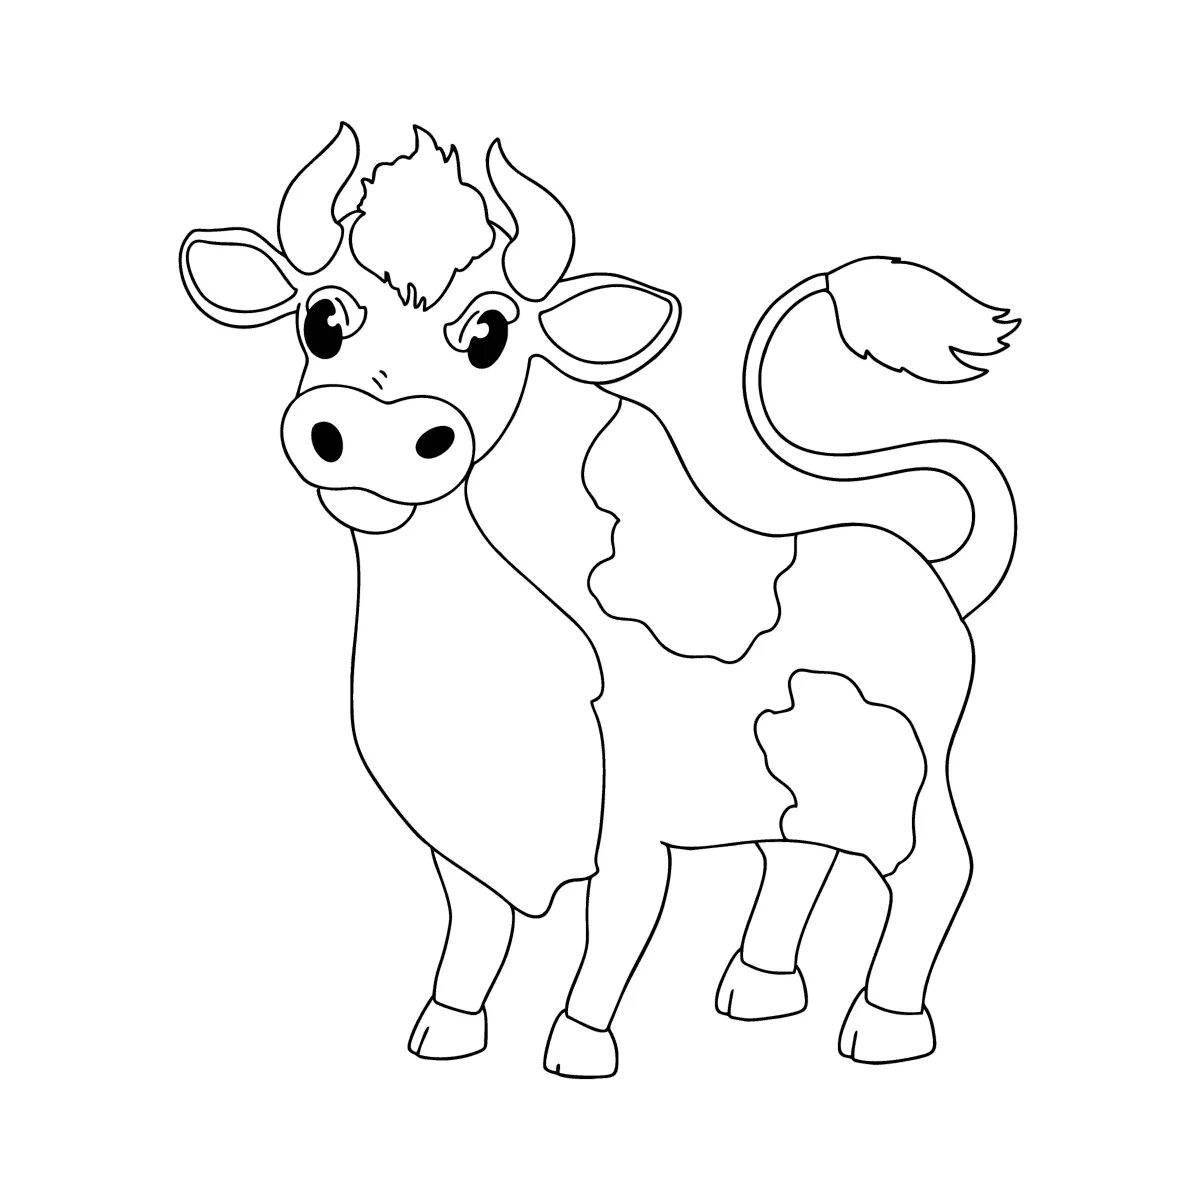 Adorable cow coloring book for toddlers 2 3 years old